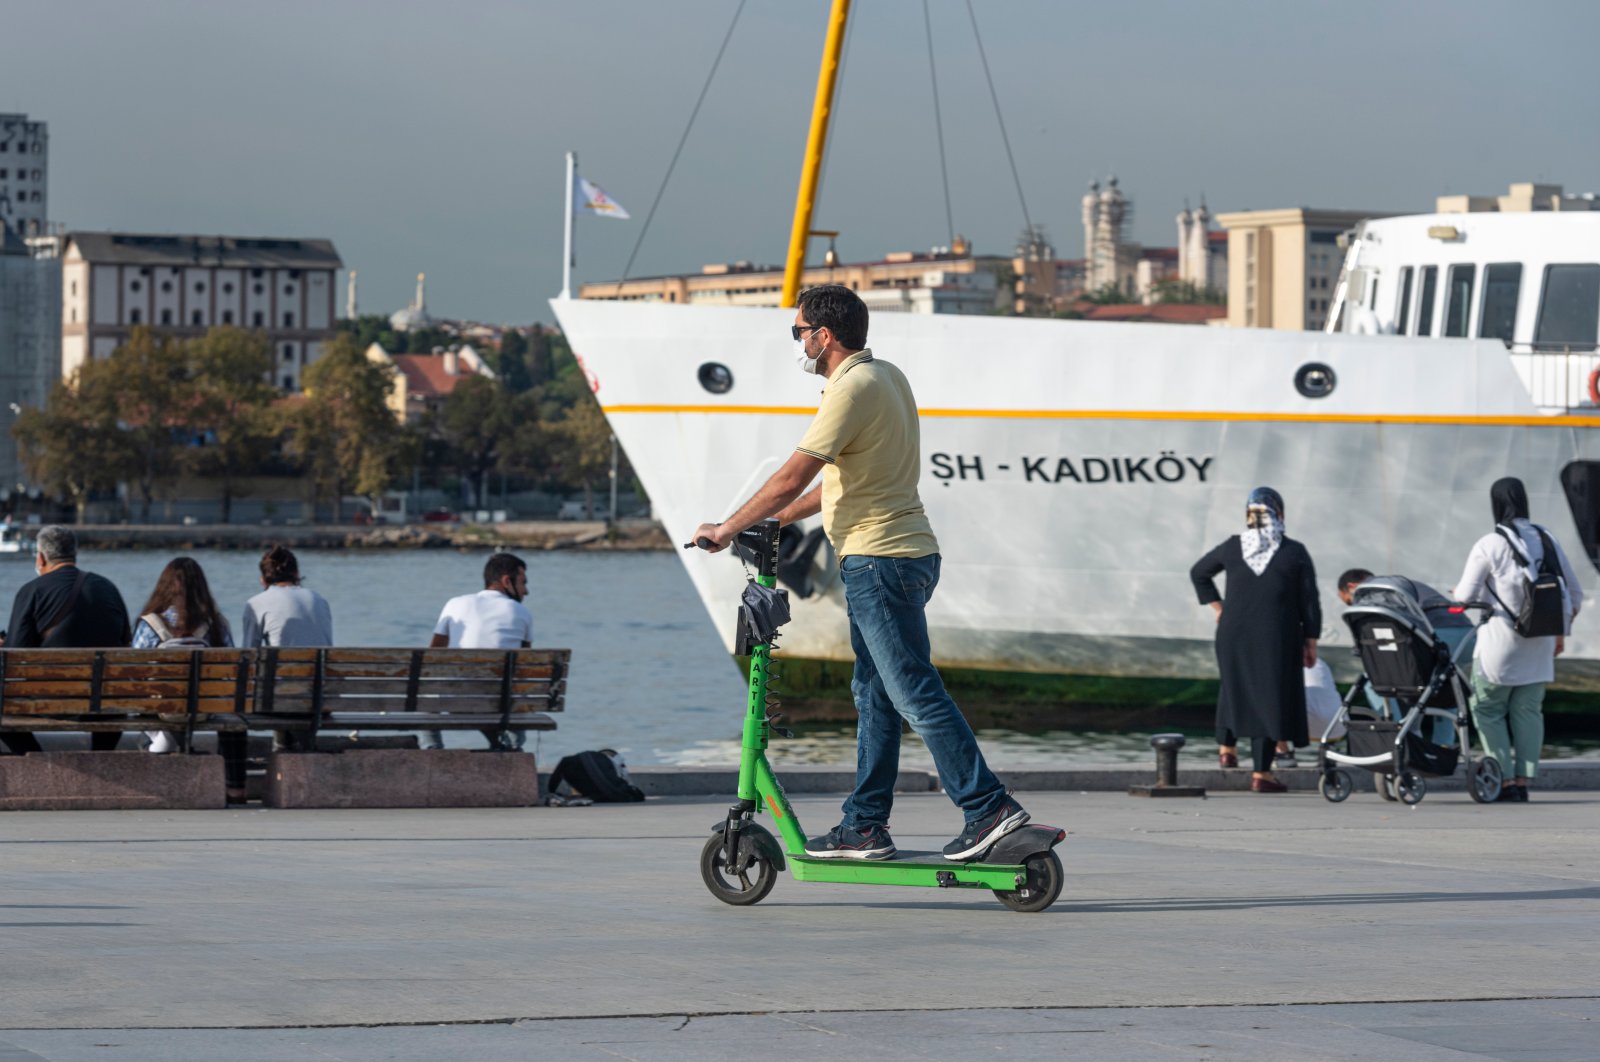 A man rides a Martı e-scooter in Istanbul, Türkiye in this undated photo. (Shutterstock Photo)